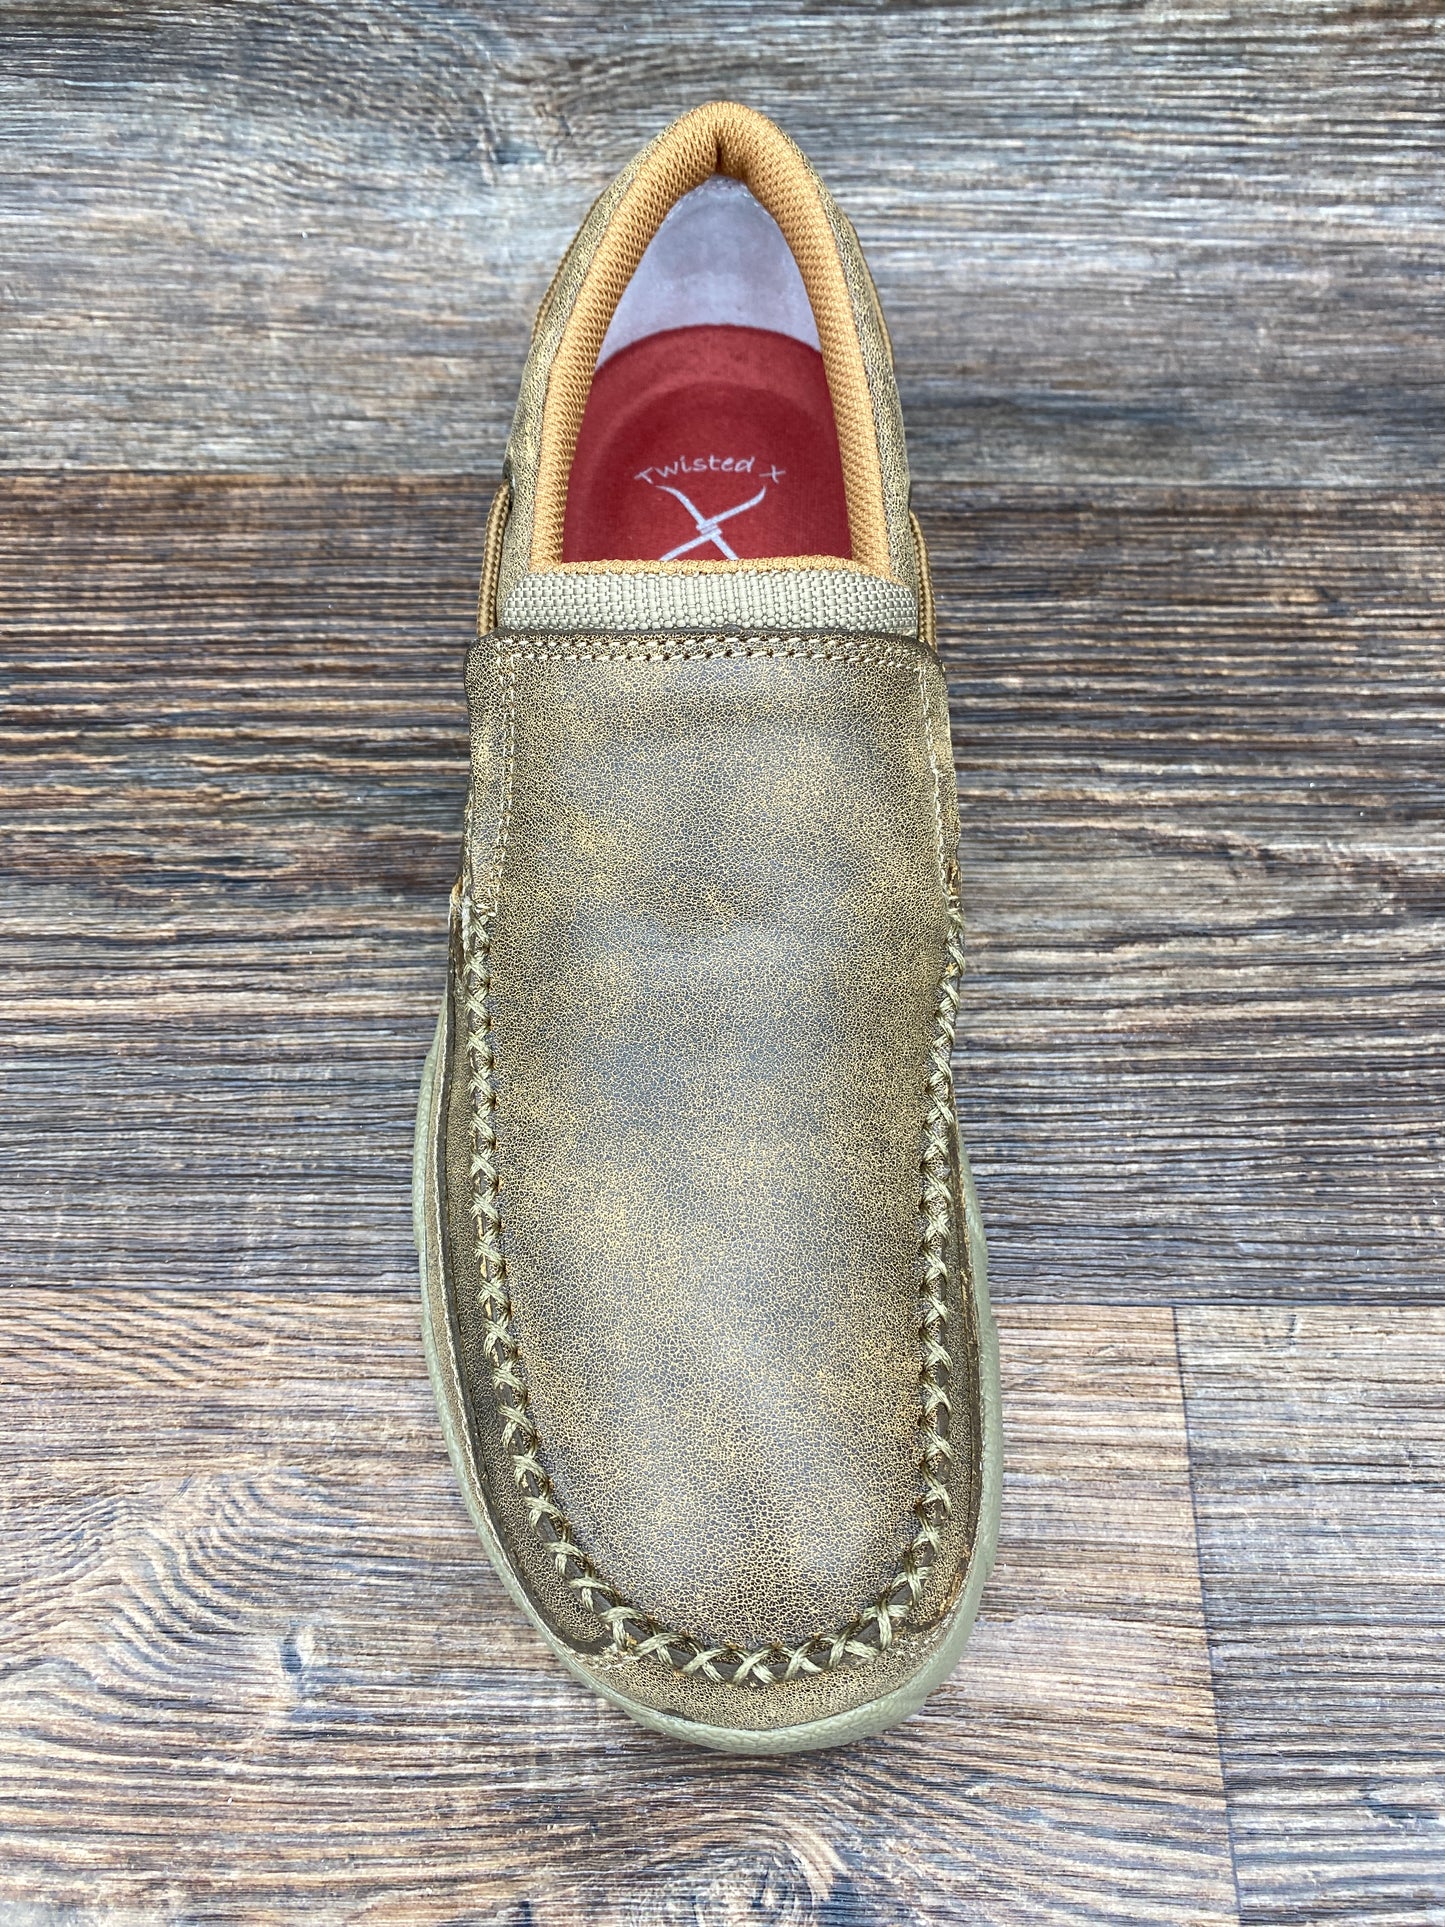 mdms002 Men’s Original Slip-On Driving Moc by Twisted Xo